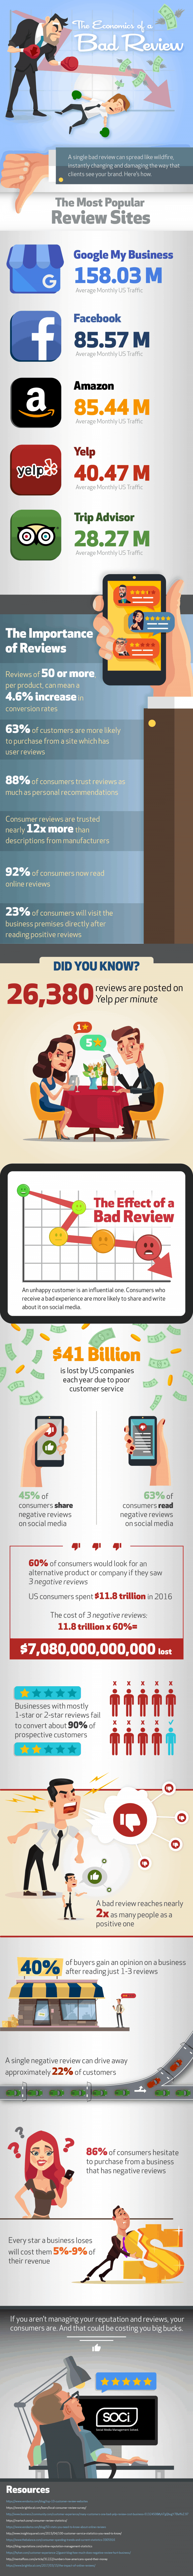 infographic describes the economics of bad reviews and how they impact your business